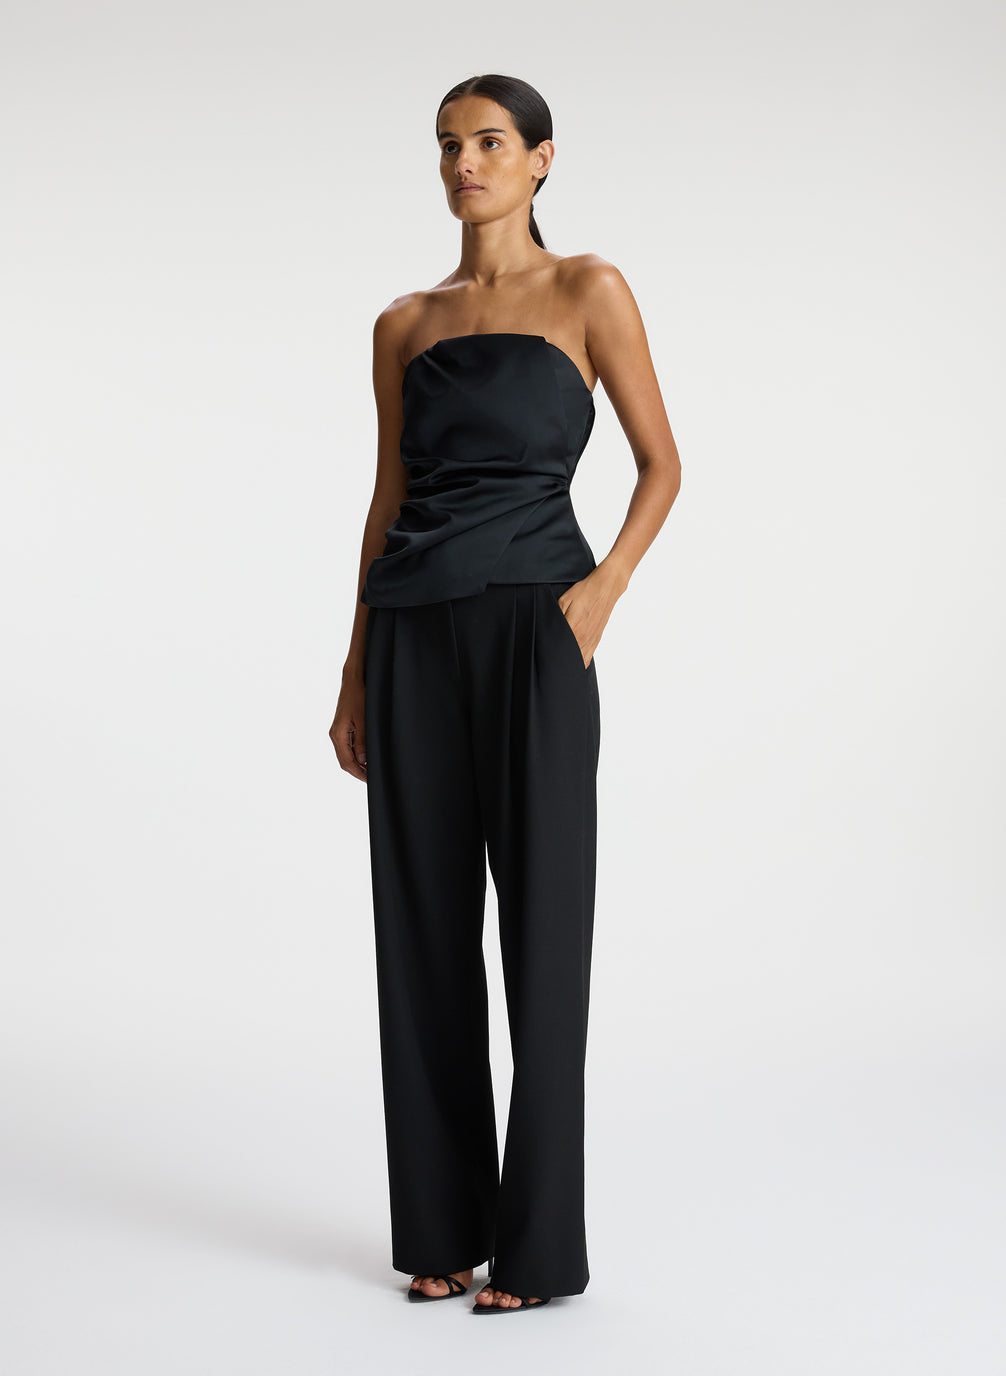 side  view of woman wearing black strapless satin top and black pants